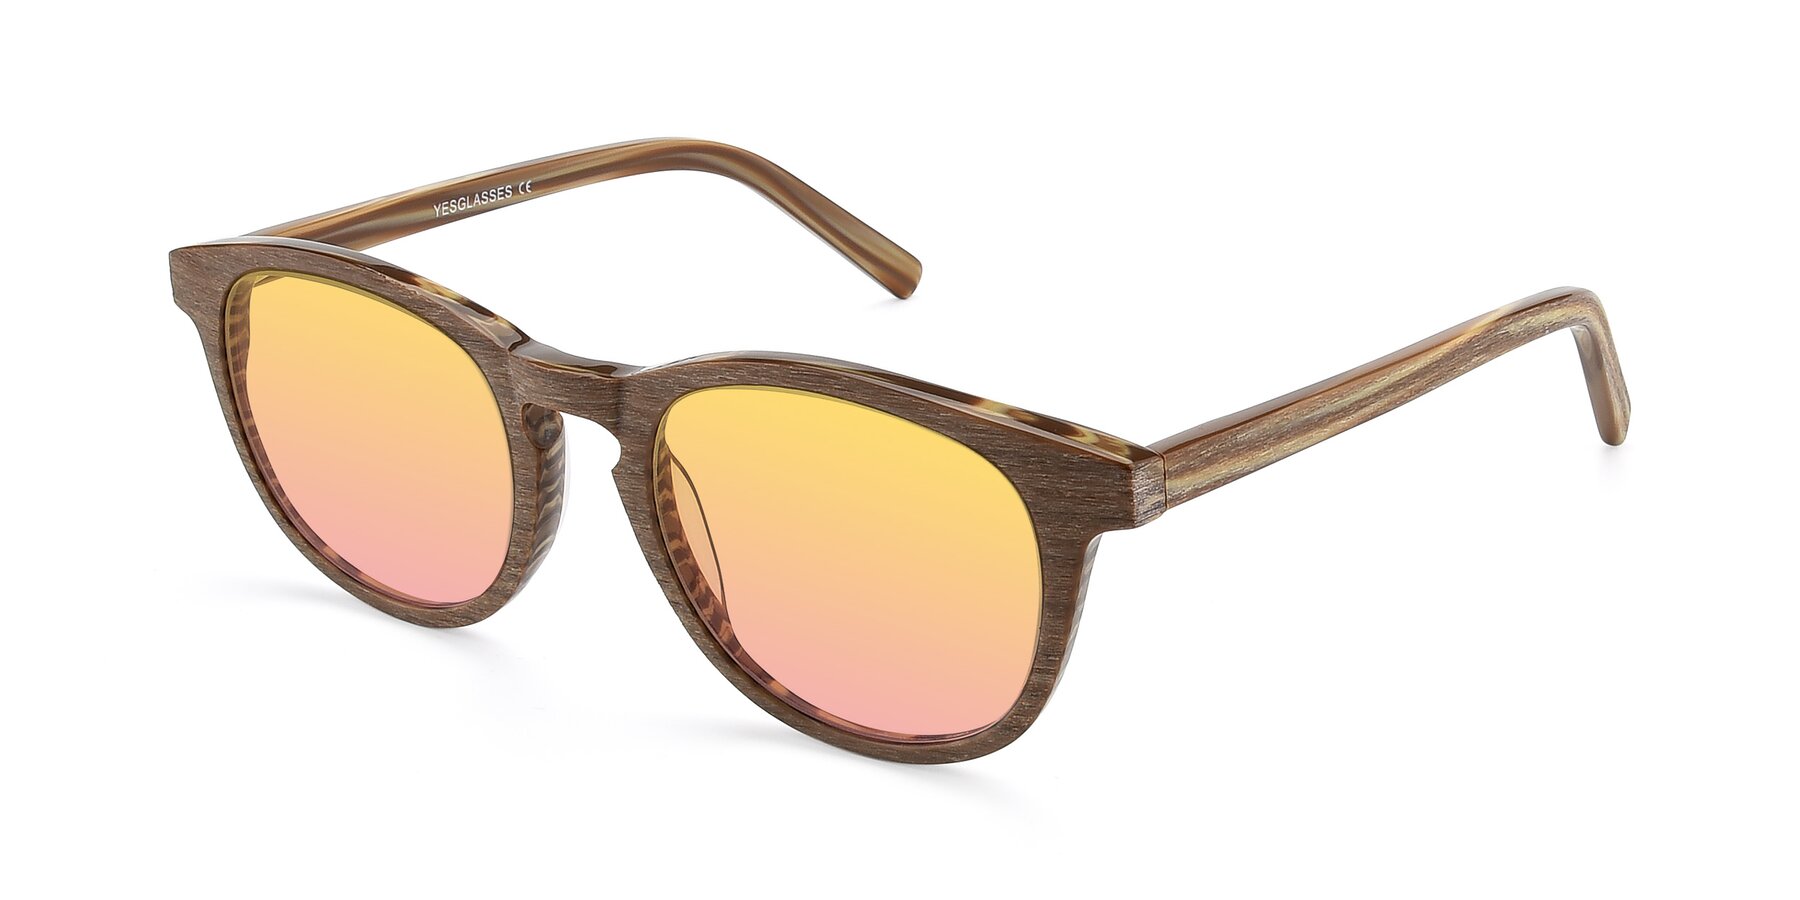 Angle of SR6044 in Brown-Wooden with Yellow / Pink Gradient Lenses